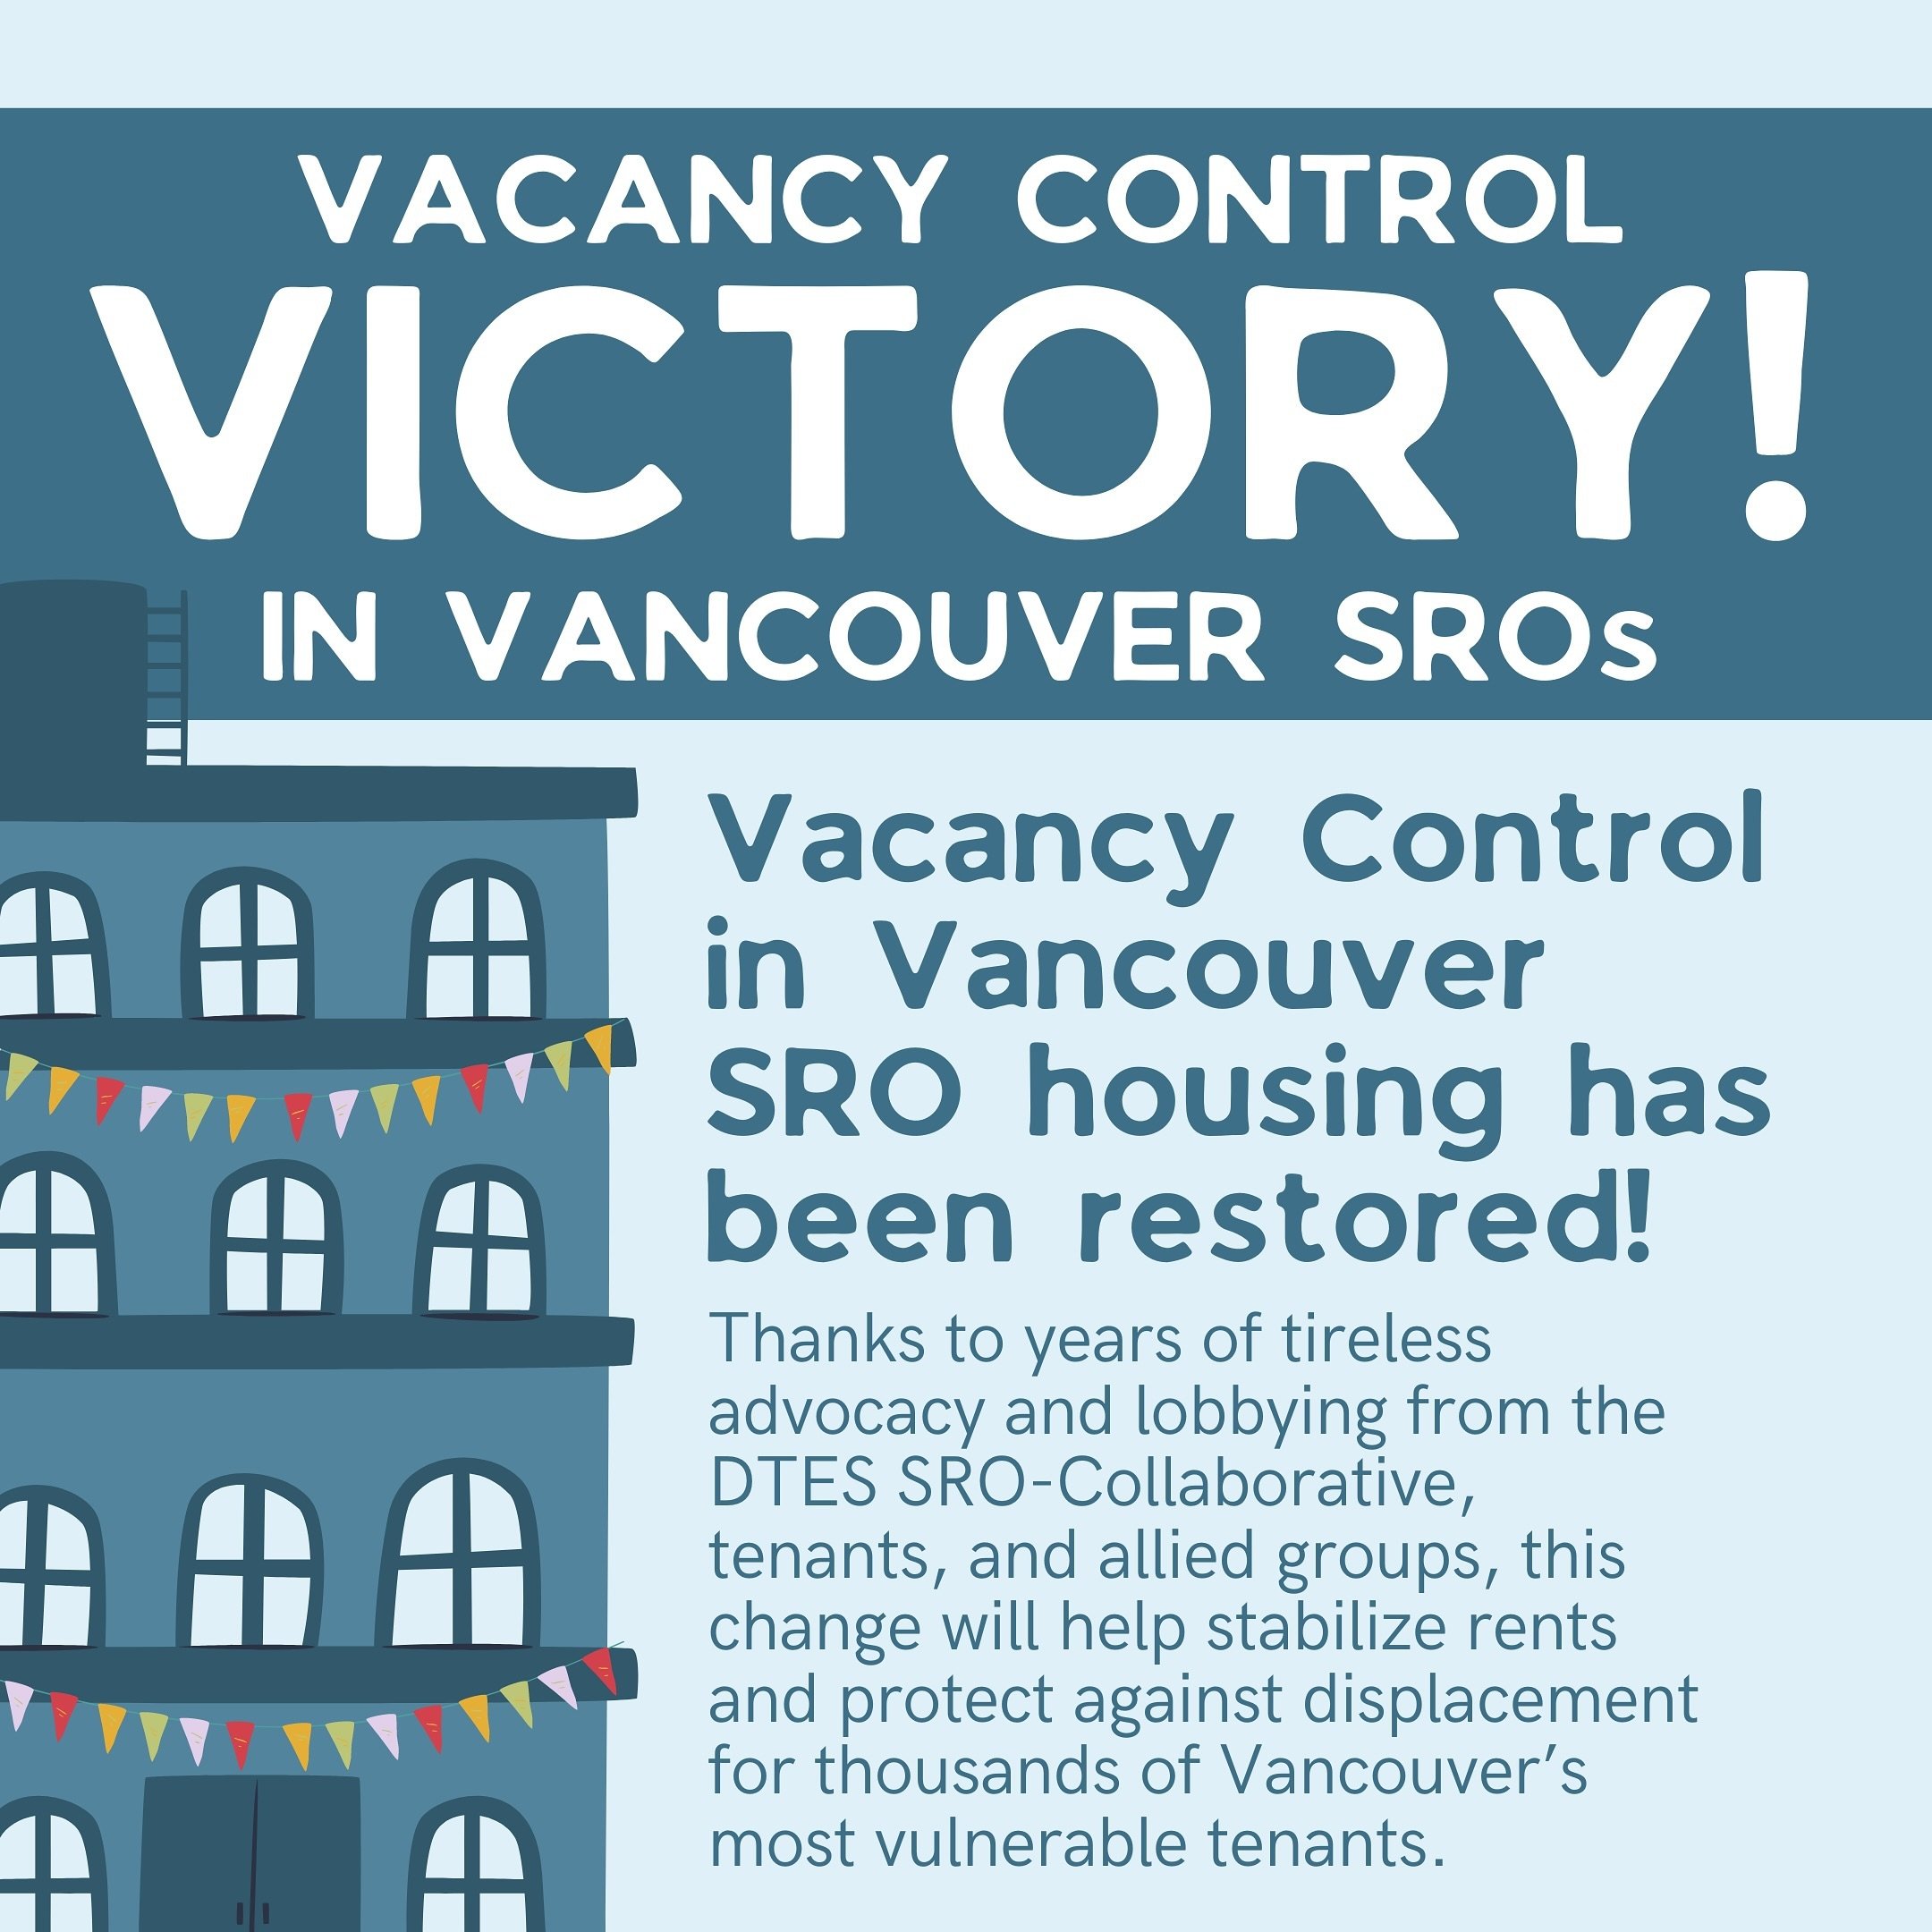 Yesterday, over a dozen SRO tenants, tenant advocates, and allies attended the BC Legislature to witness the passing of Bill 27: a historic win for Vancouver&rsquo;s DTES. After years of legal challenges to the SRO Vacancy Control bylaw that was orig